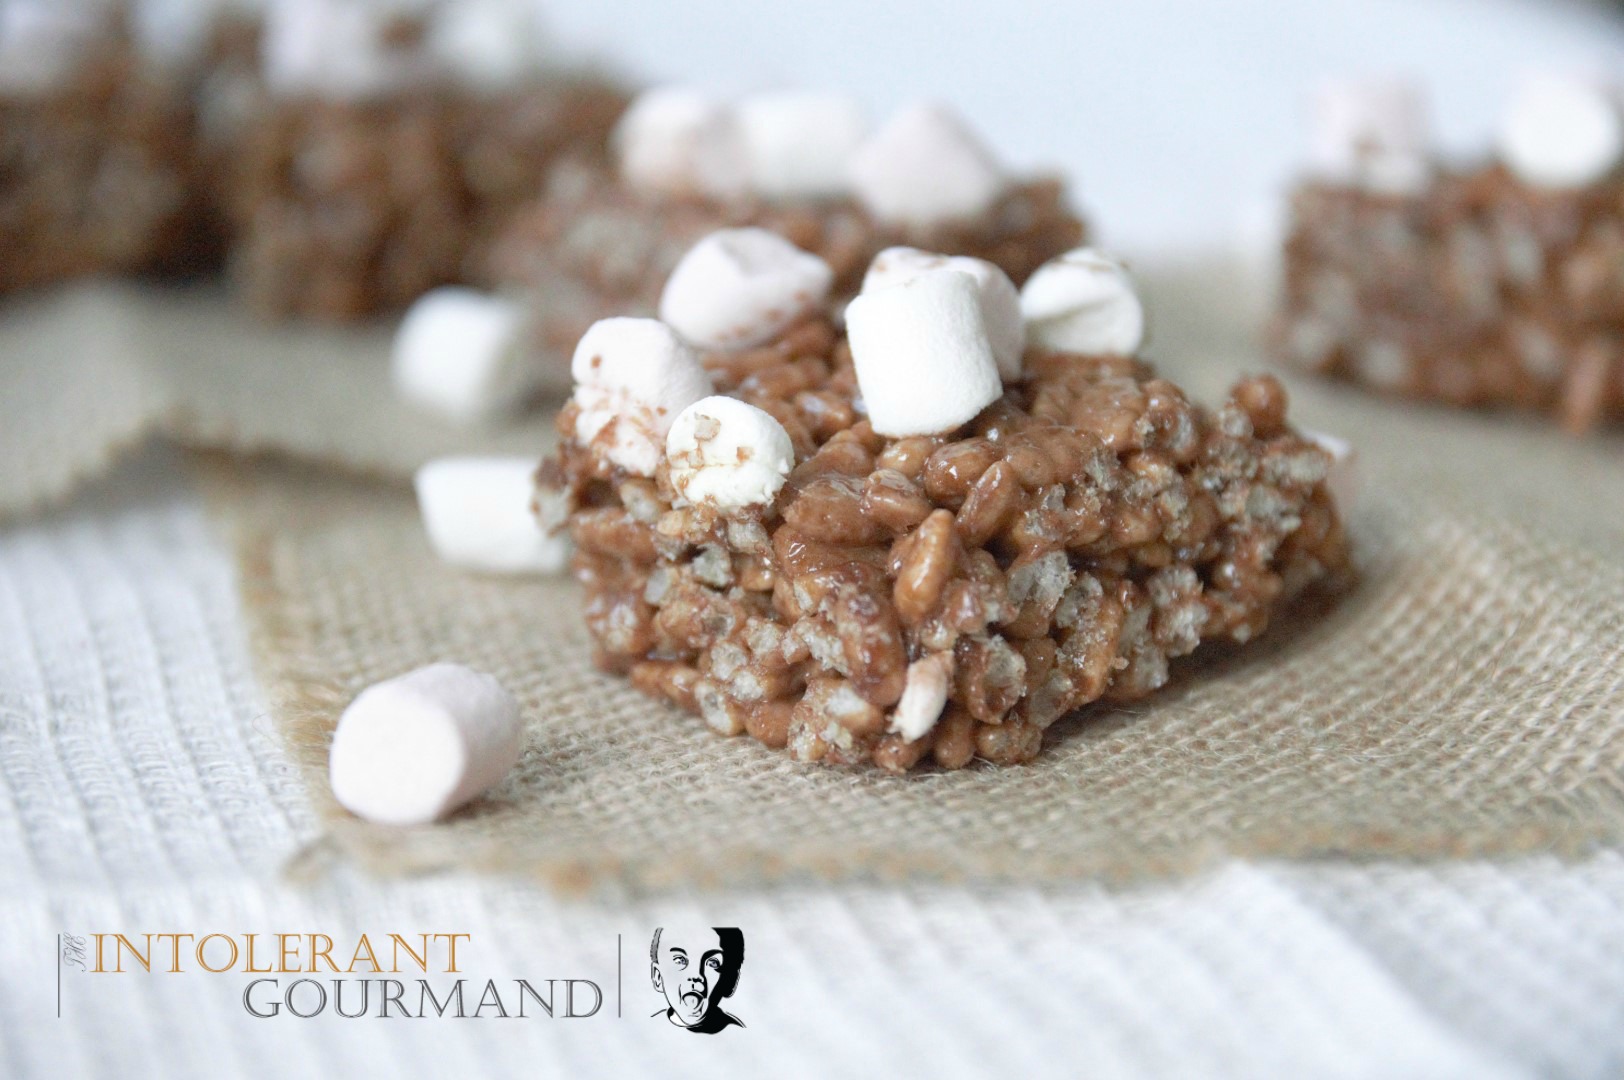 Chocolate marshmallow crispie squares - dairy-free, gluten-free, and super simple to make! The marshmallows are vegan too! www.intolerantgourmand.com